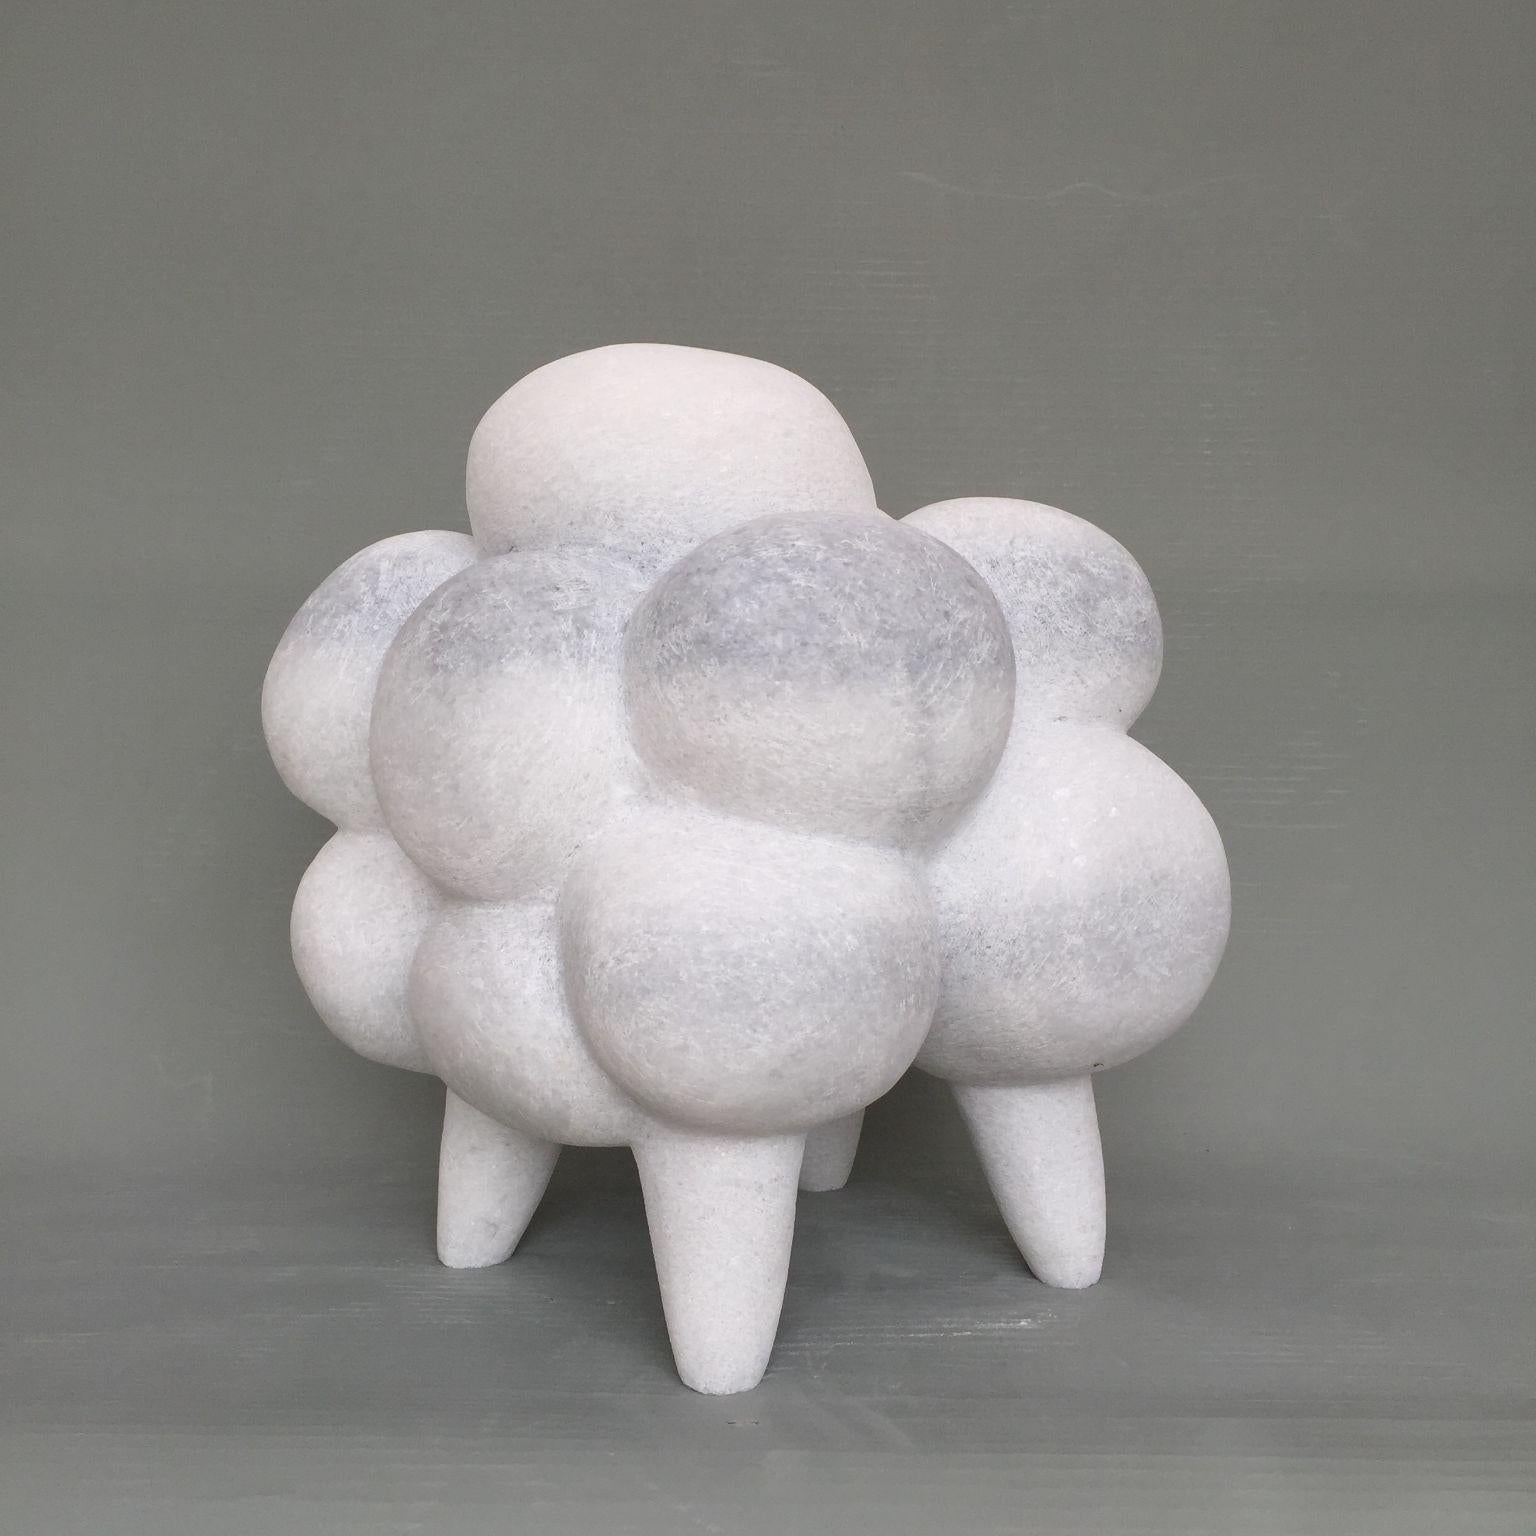 Standing grey cloud hand carved marble sculpture by Tom Von Kaenel
Dimensions: D 34 x W 31 x H 35 cm
Materials: Marble

Tom von Kaenel, sculptor and painter, was born in Switzerland in 1961. Already in his early
childhood he was deeply devoted